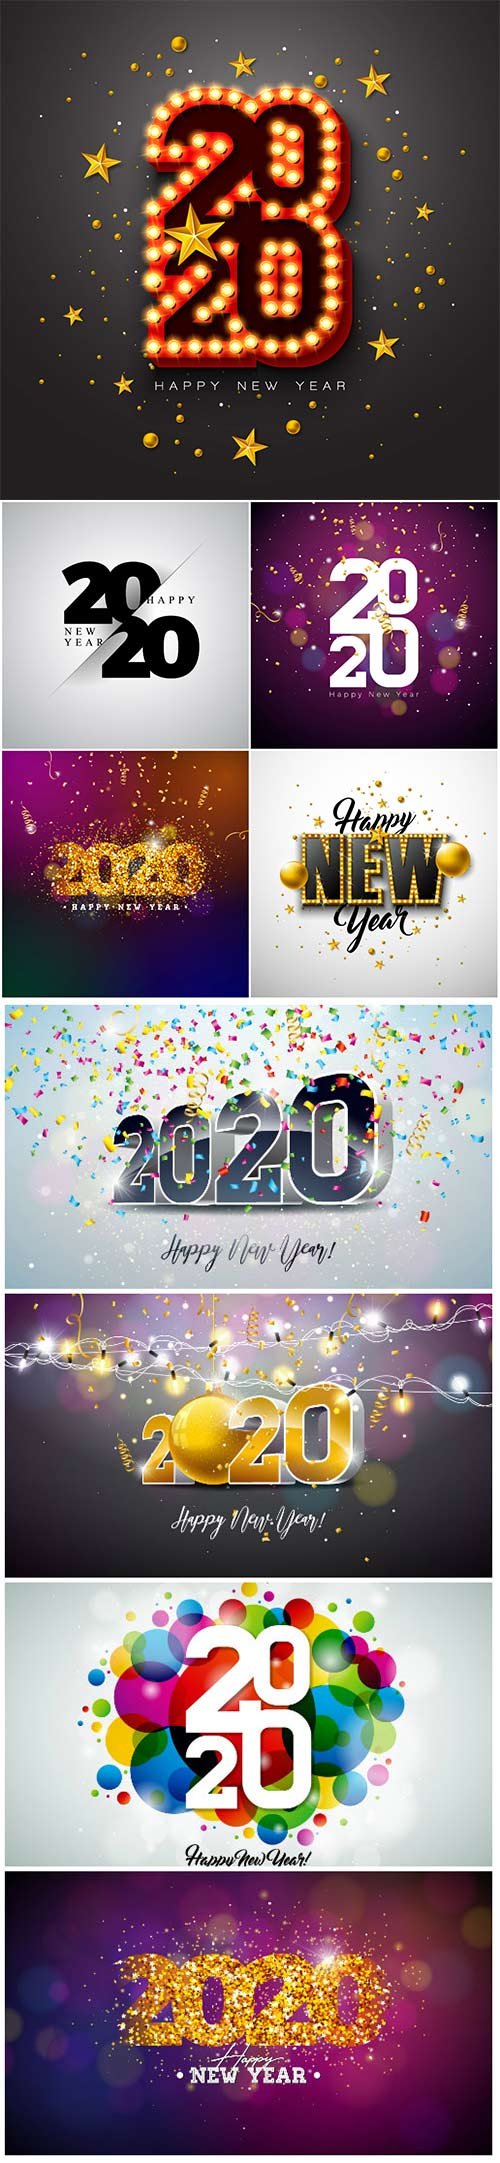 2020 Happy New Year illustration with 3d typography lettering